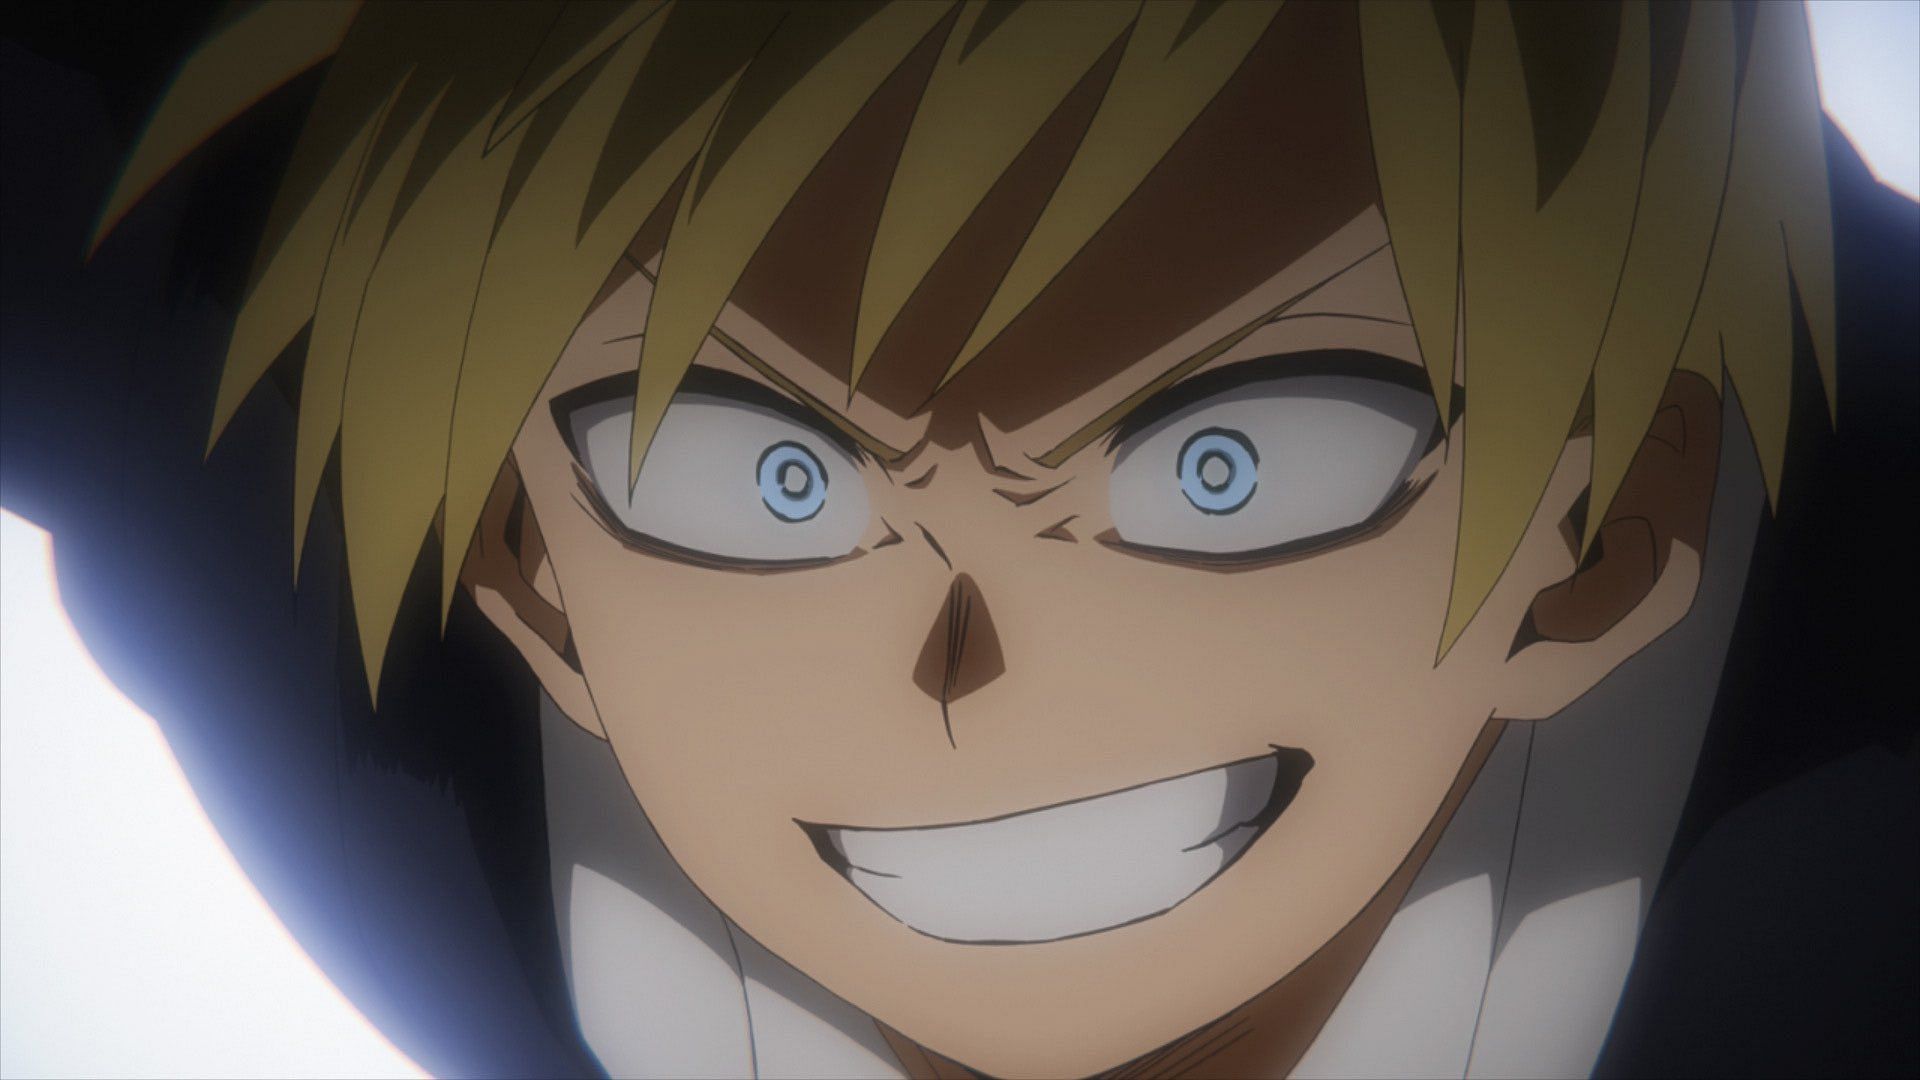 Monoma as seen in the series